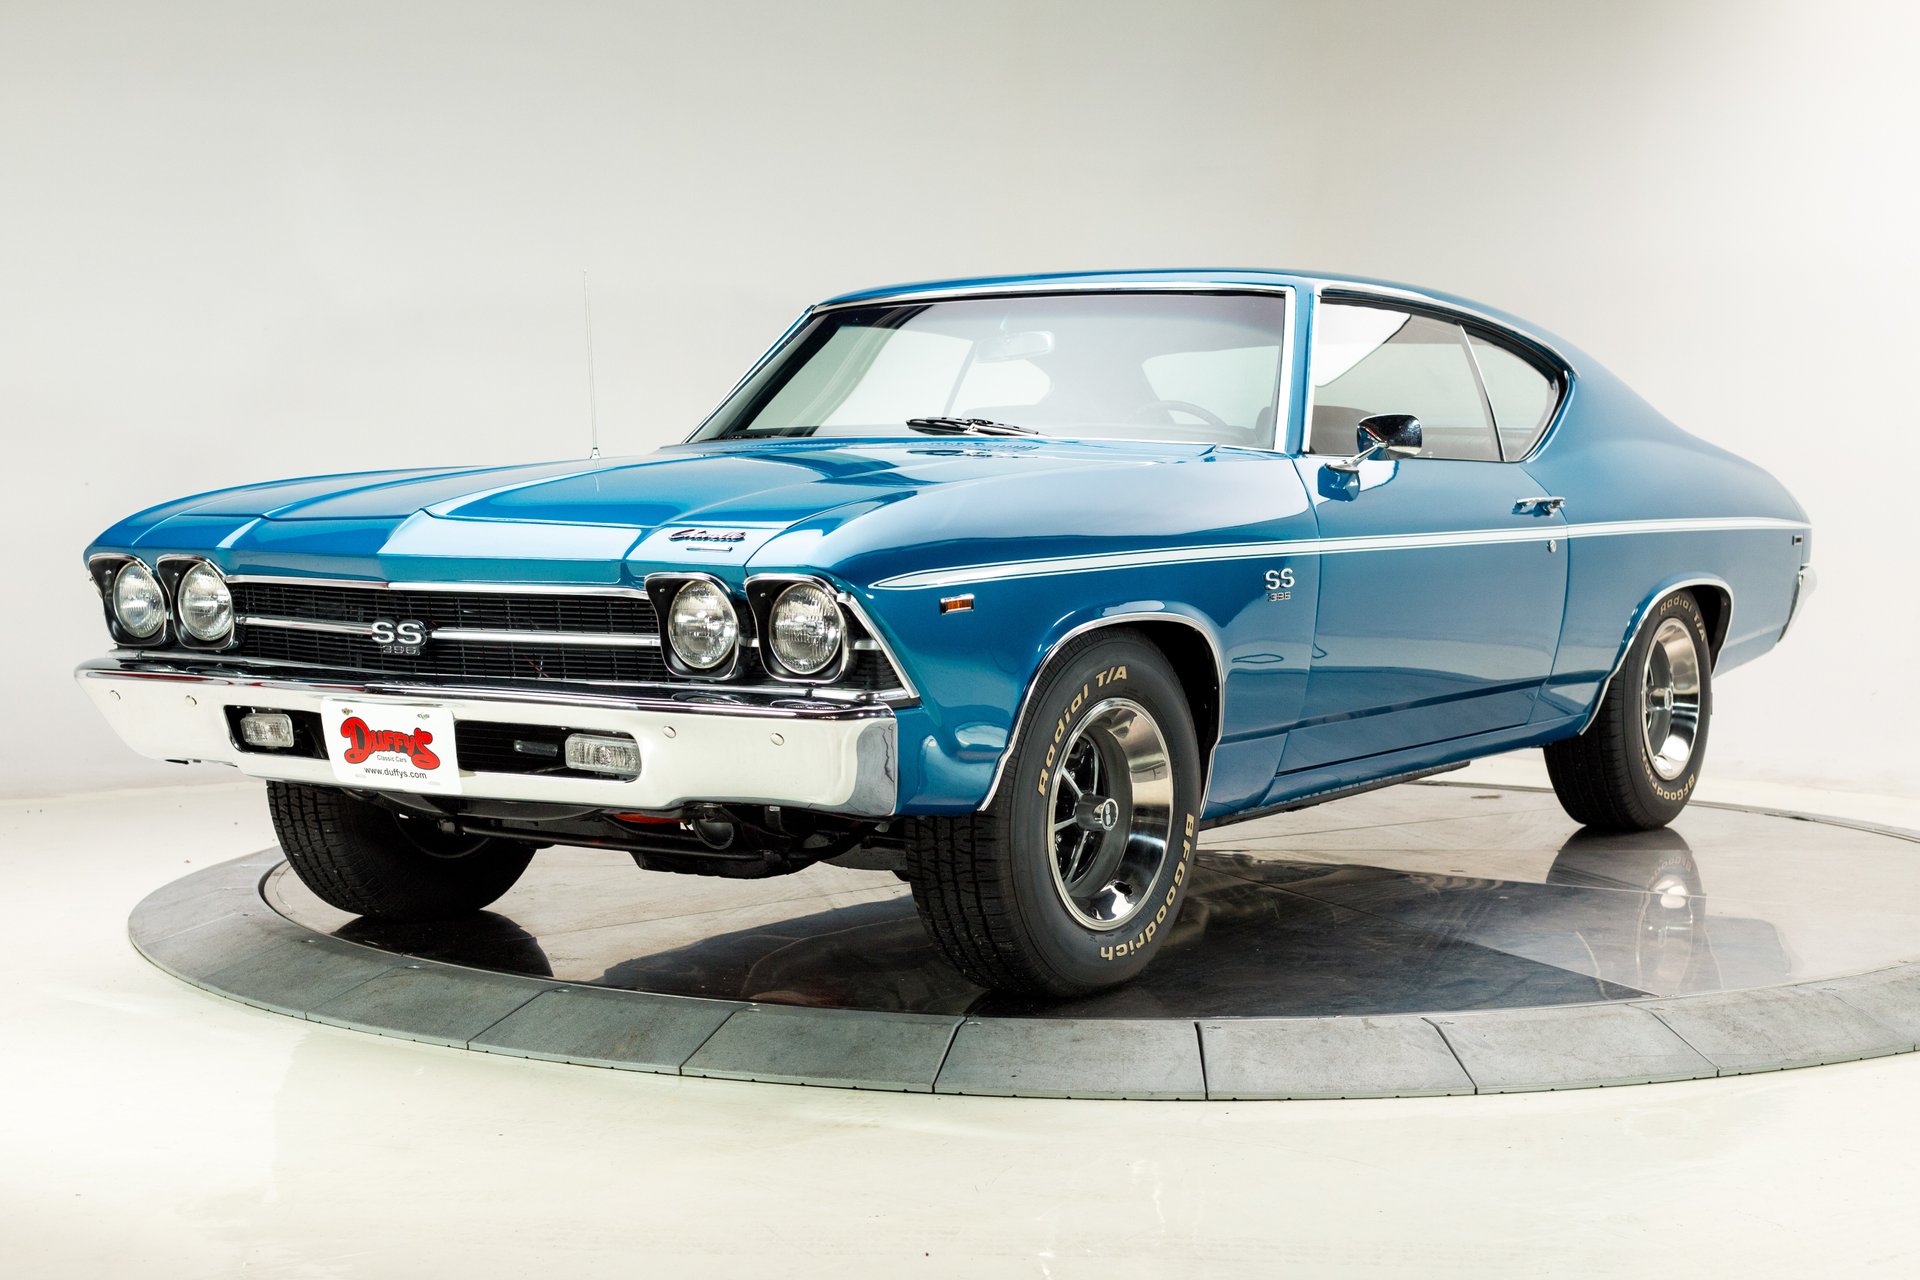 1969 Chevrolet Chevelle SS Duffy's Classic Cars.